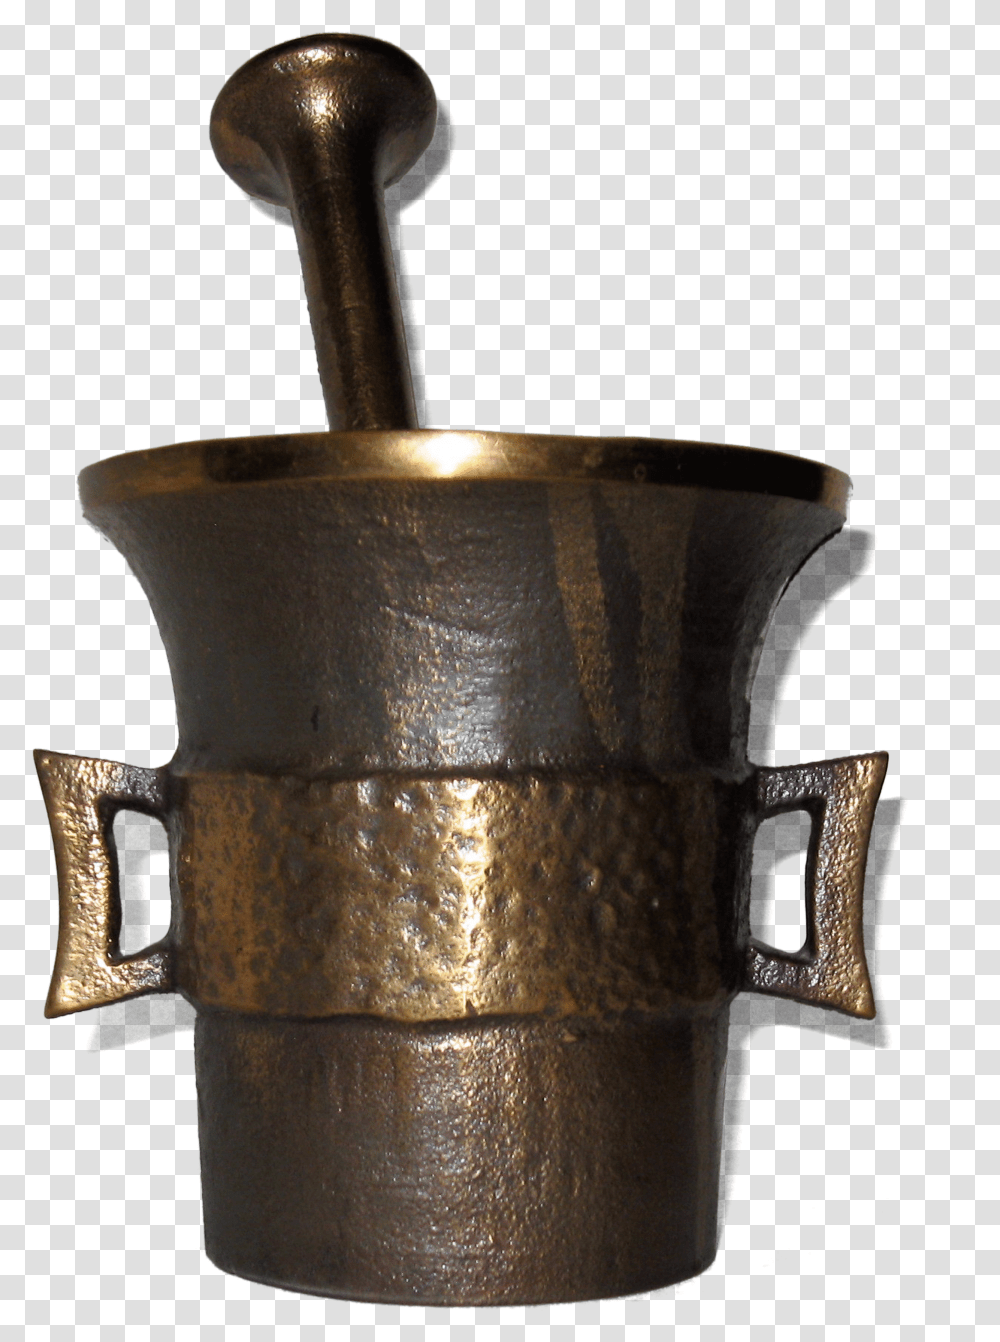 Mortar And Pestle Cookware And Bakeware Transparent Png